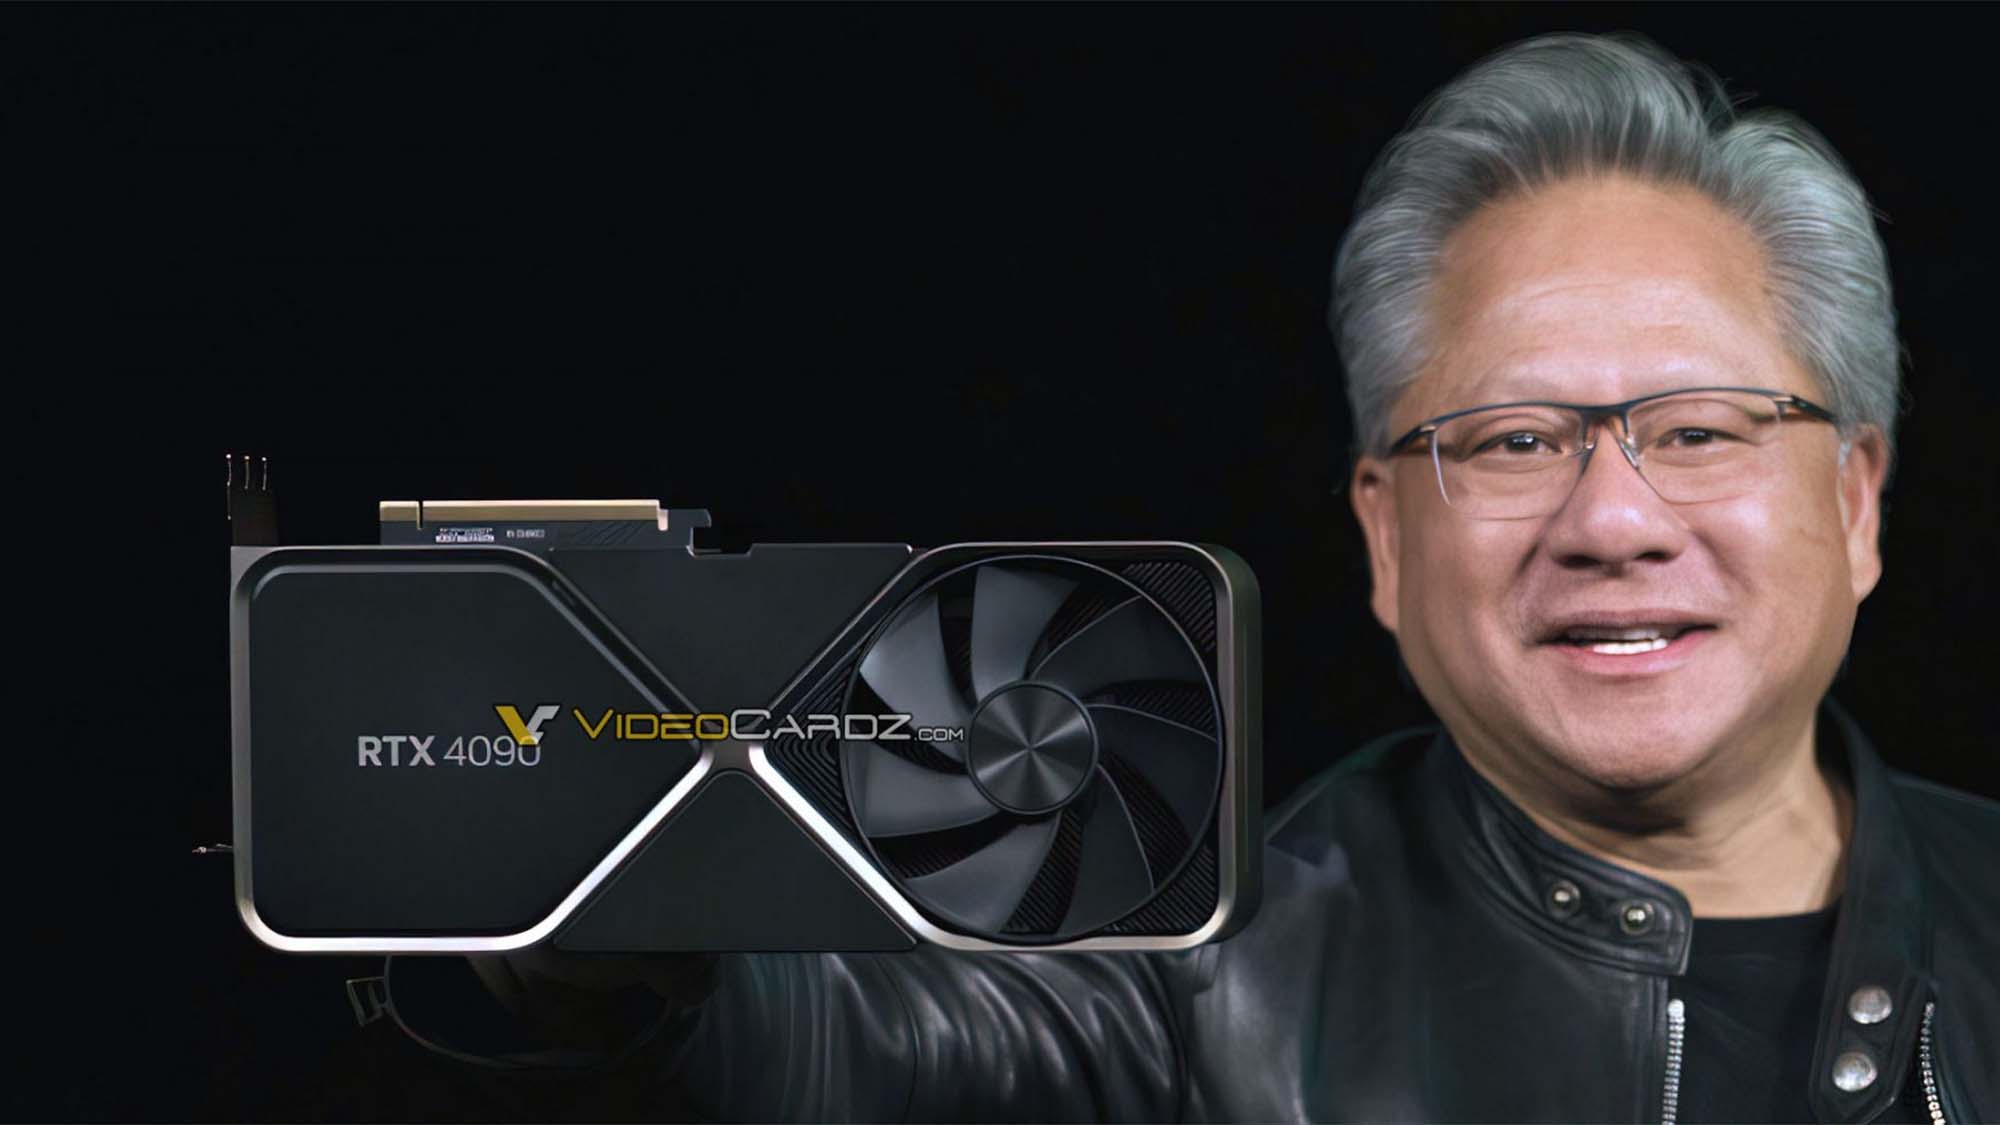 Jensen Huang supposedly holding the RTX 4090 against a black background